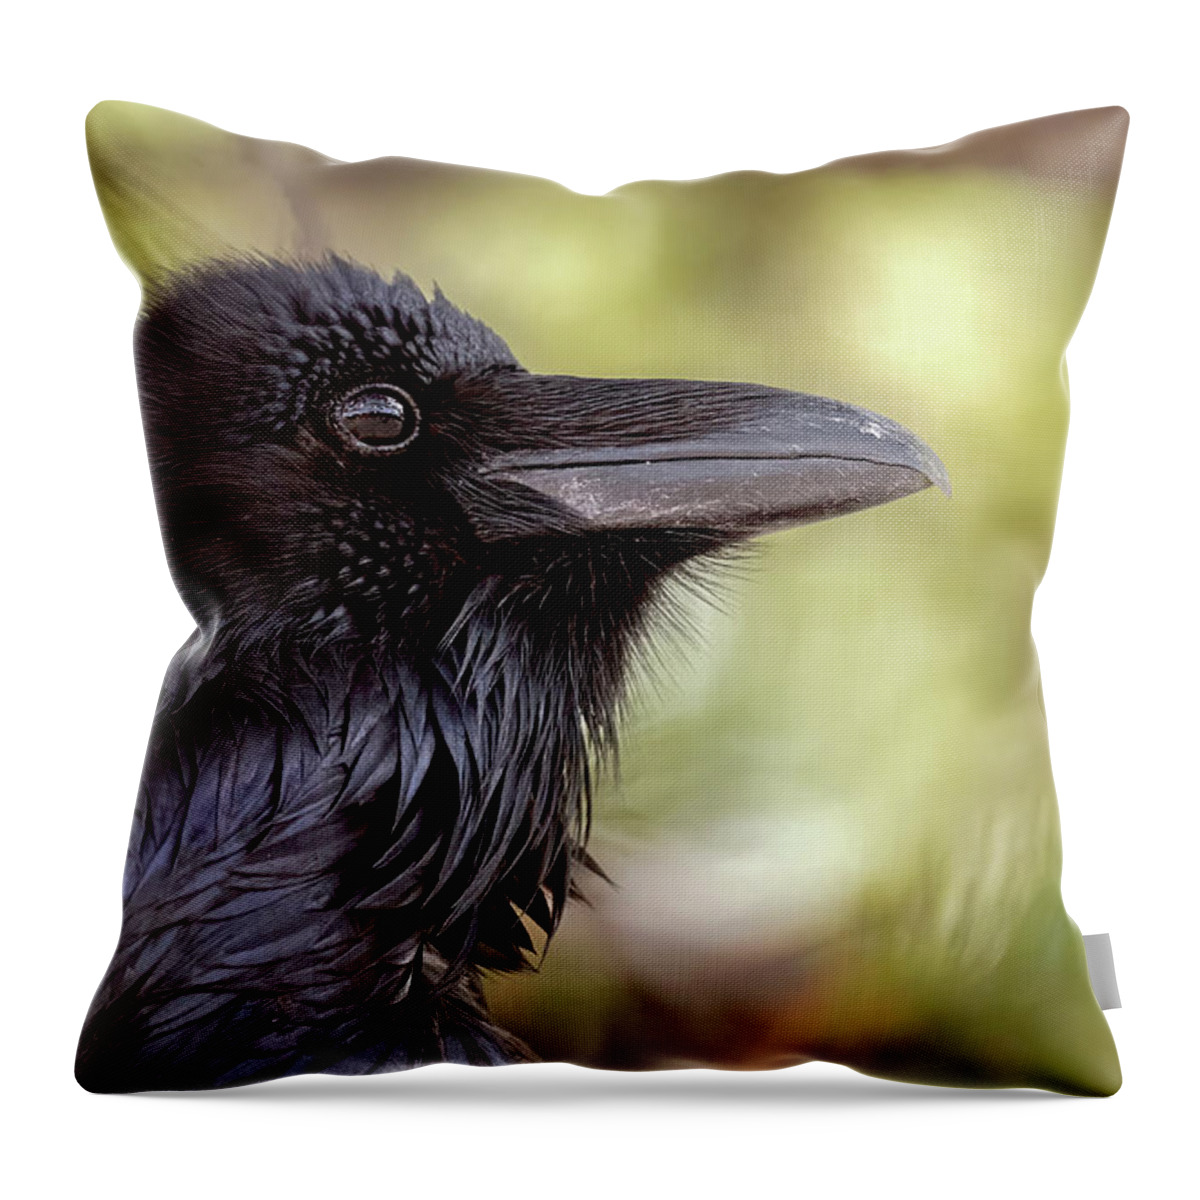 Raven Throw Pillow featuring the photograph The Raven. by Paul Martin